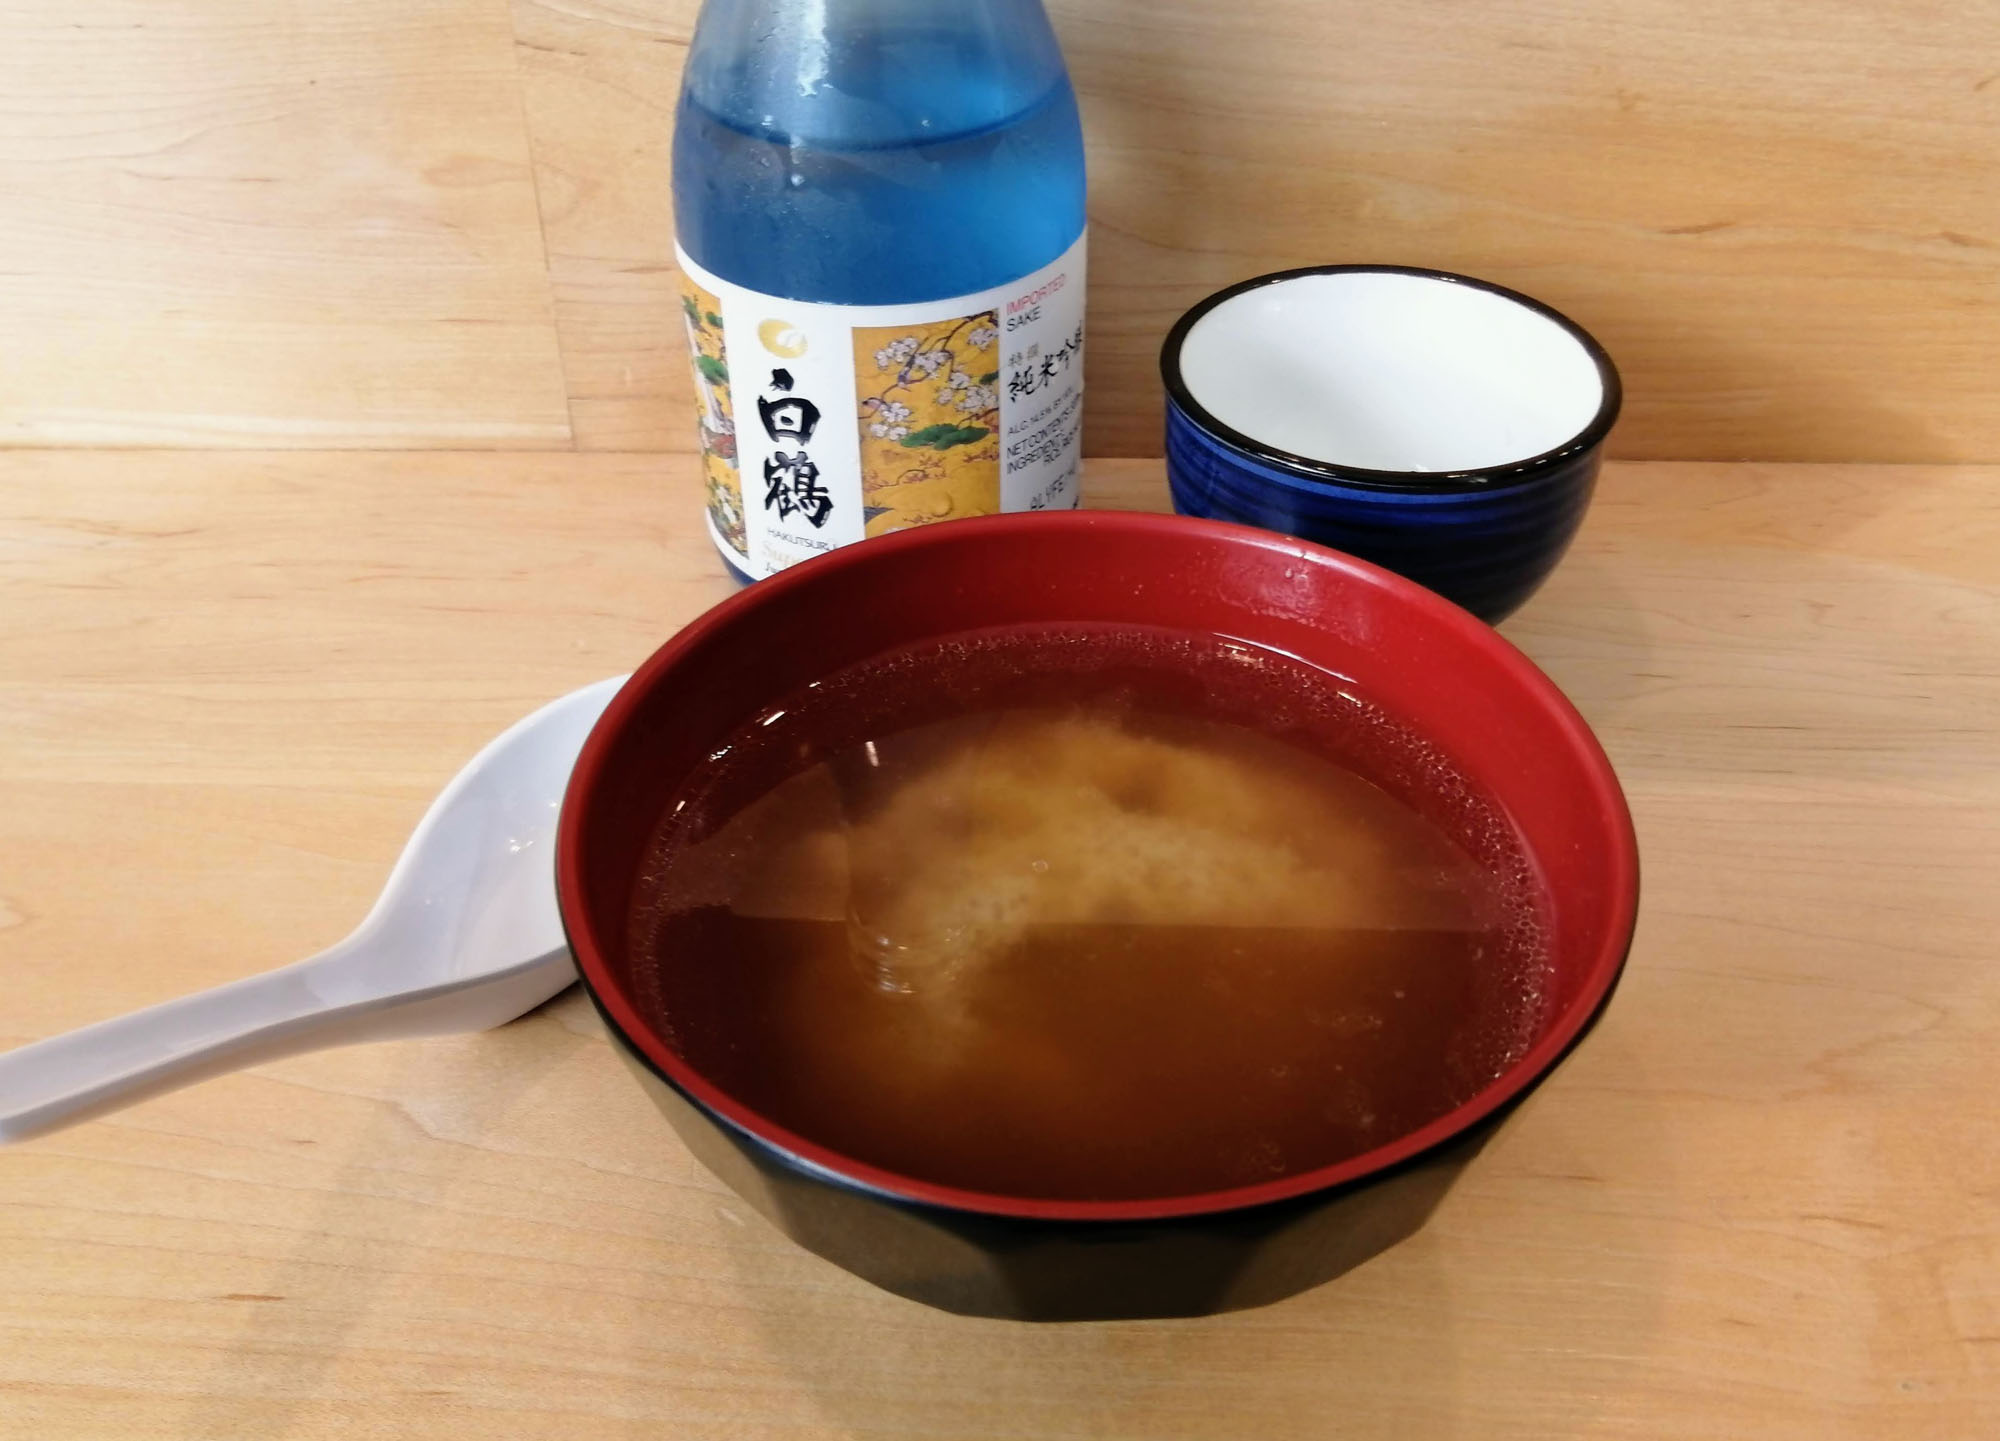 A close-up of a bowl of miso soup with a bottle of sake and a cup visible in the background. Photo by Paul Young.